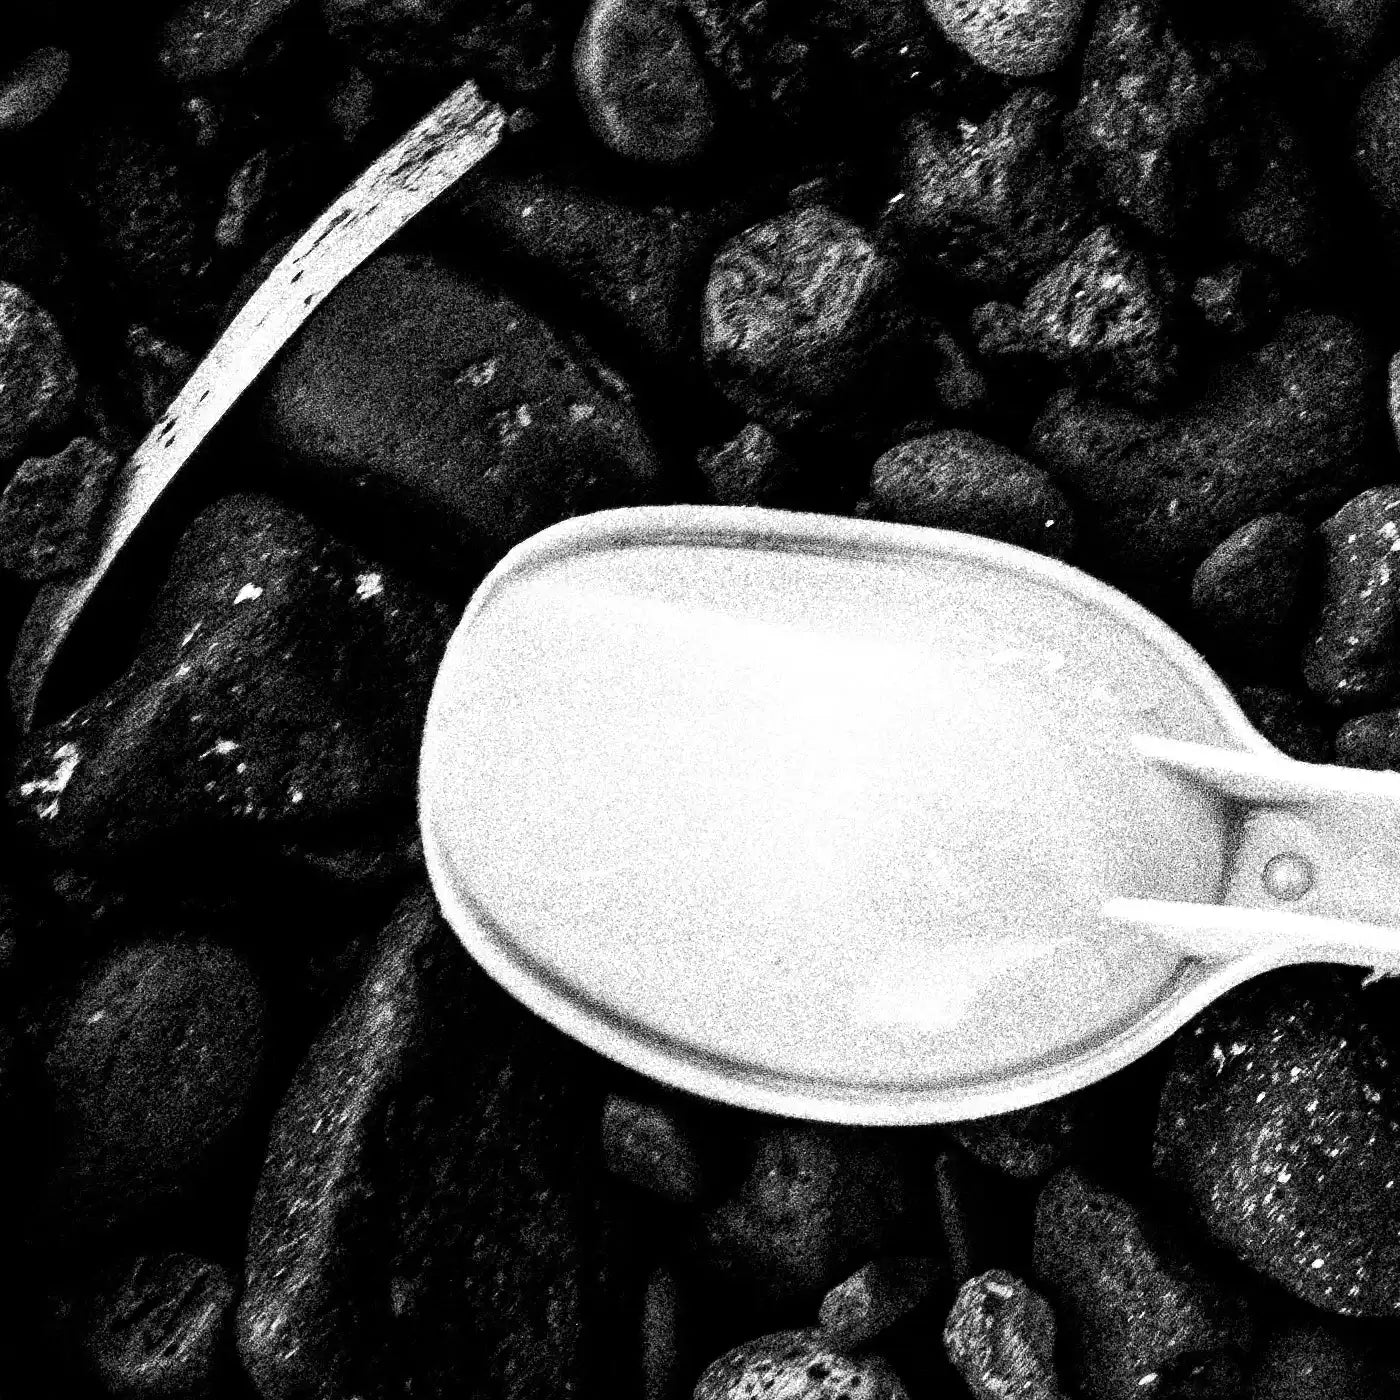 Black Pebbles and Shovel | Santorini | Chorōs | Black-and-white wall art photography from Greece - detailed view